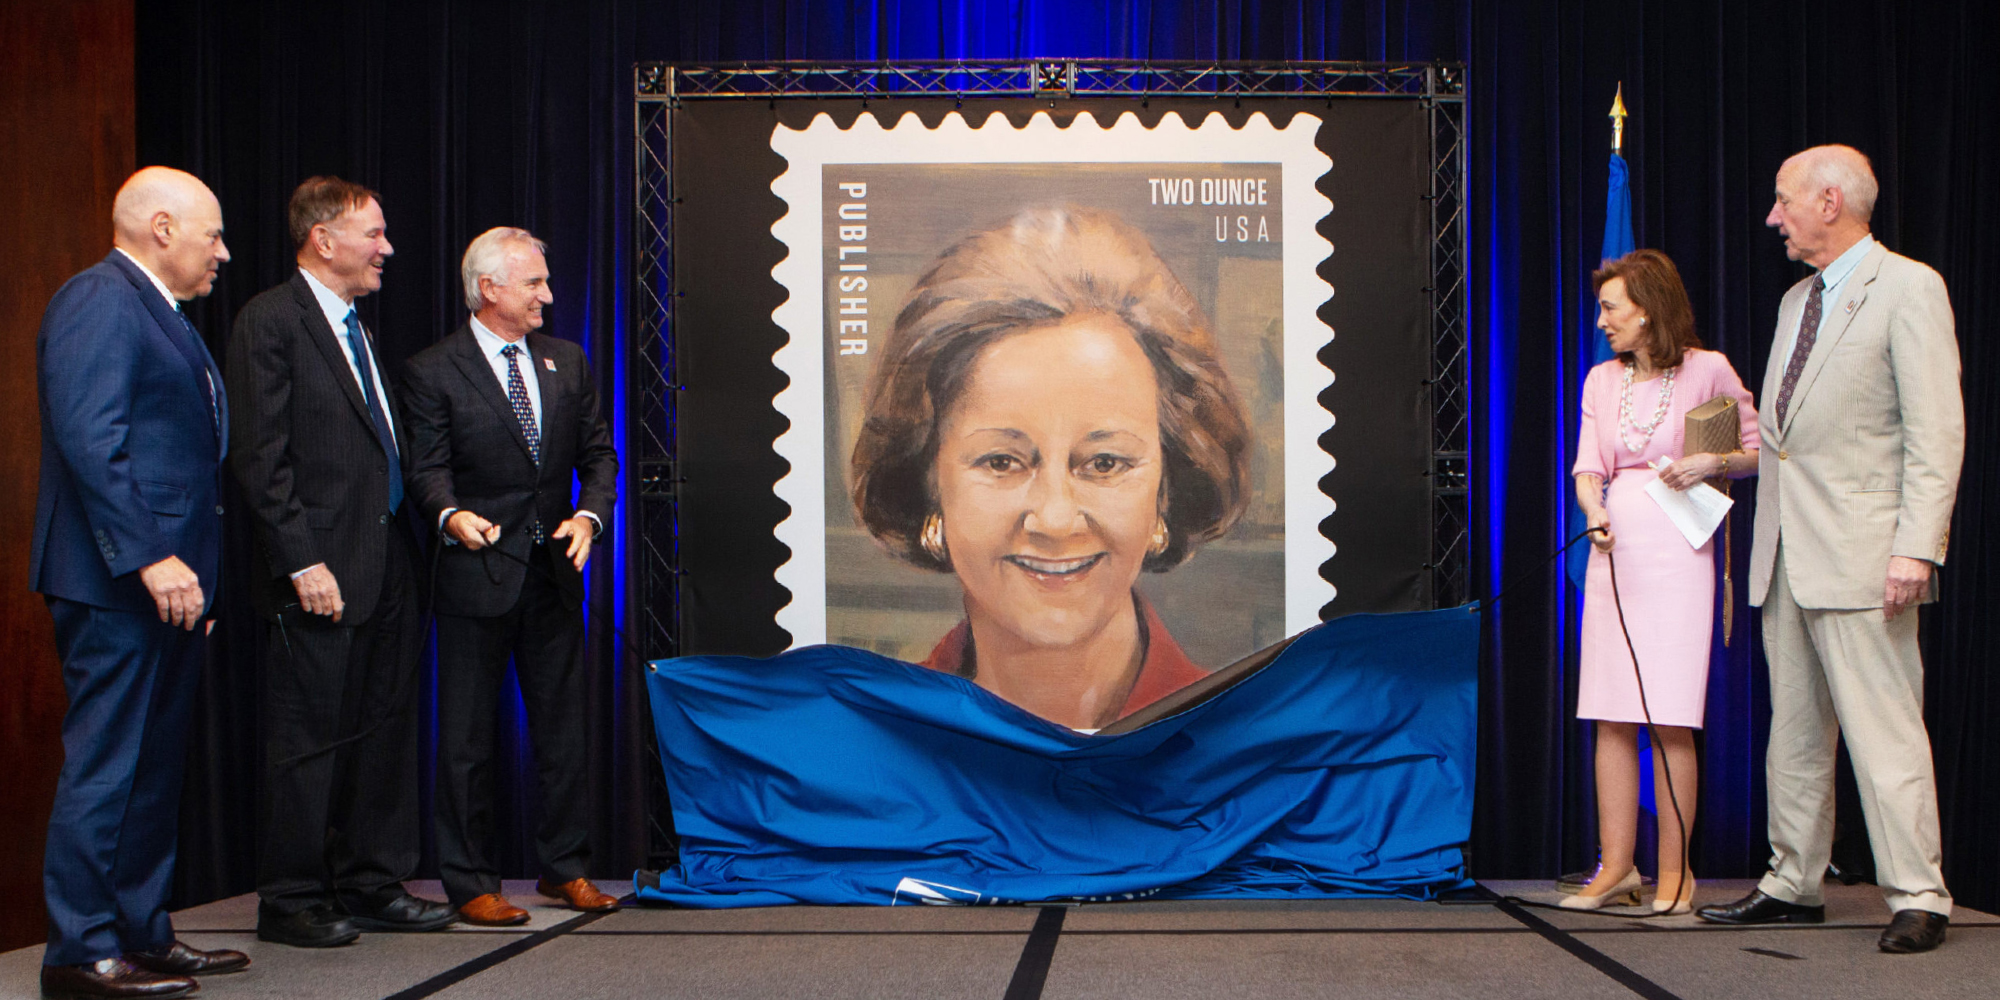 Unveiling of the new Katharine Graham US Postal Service Forever Stamp